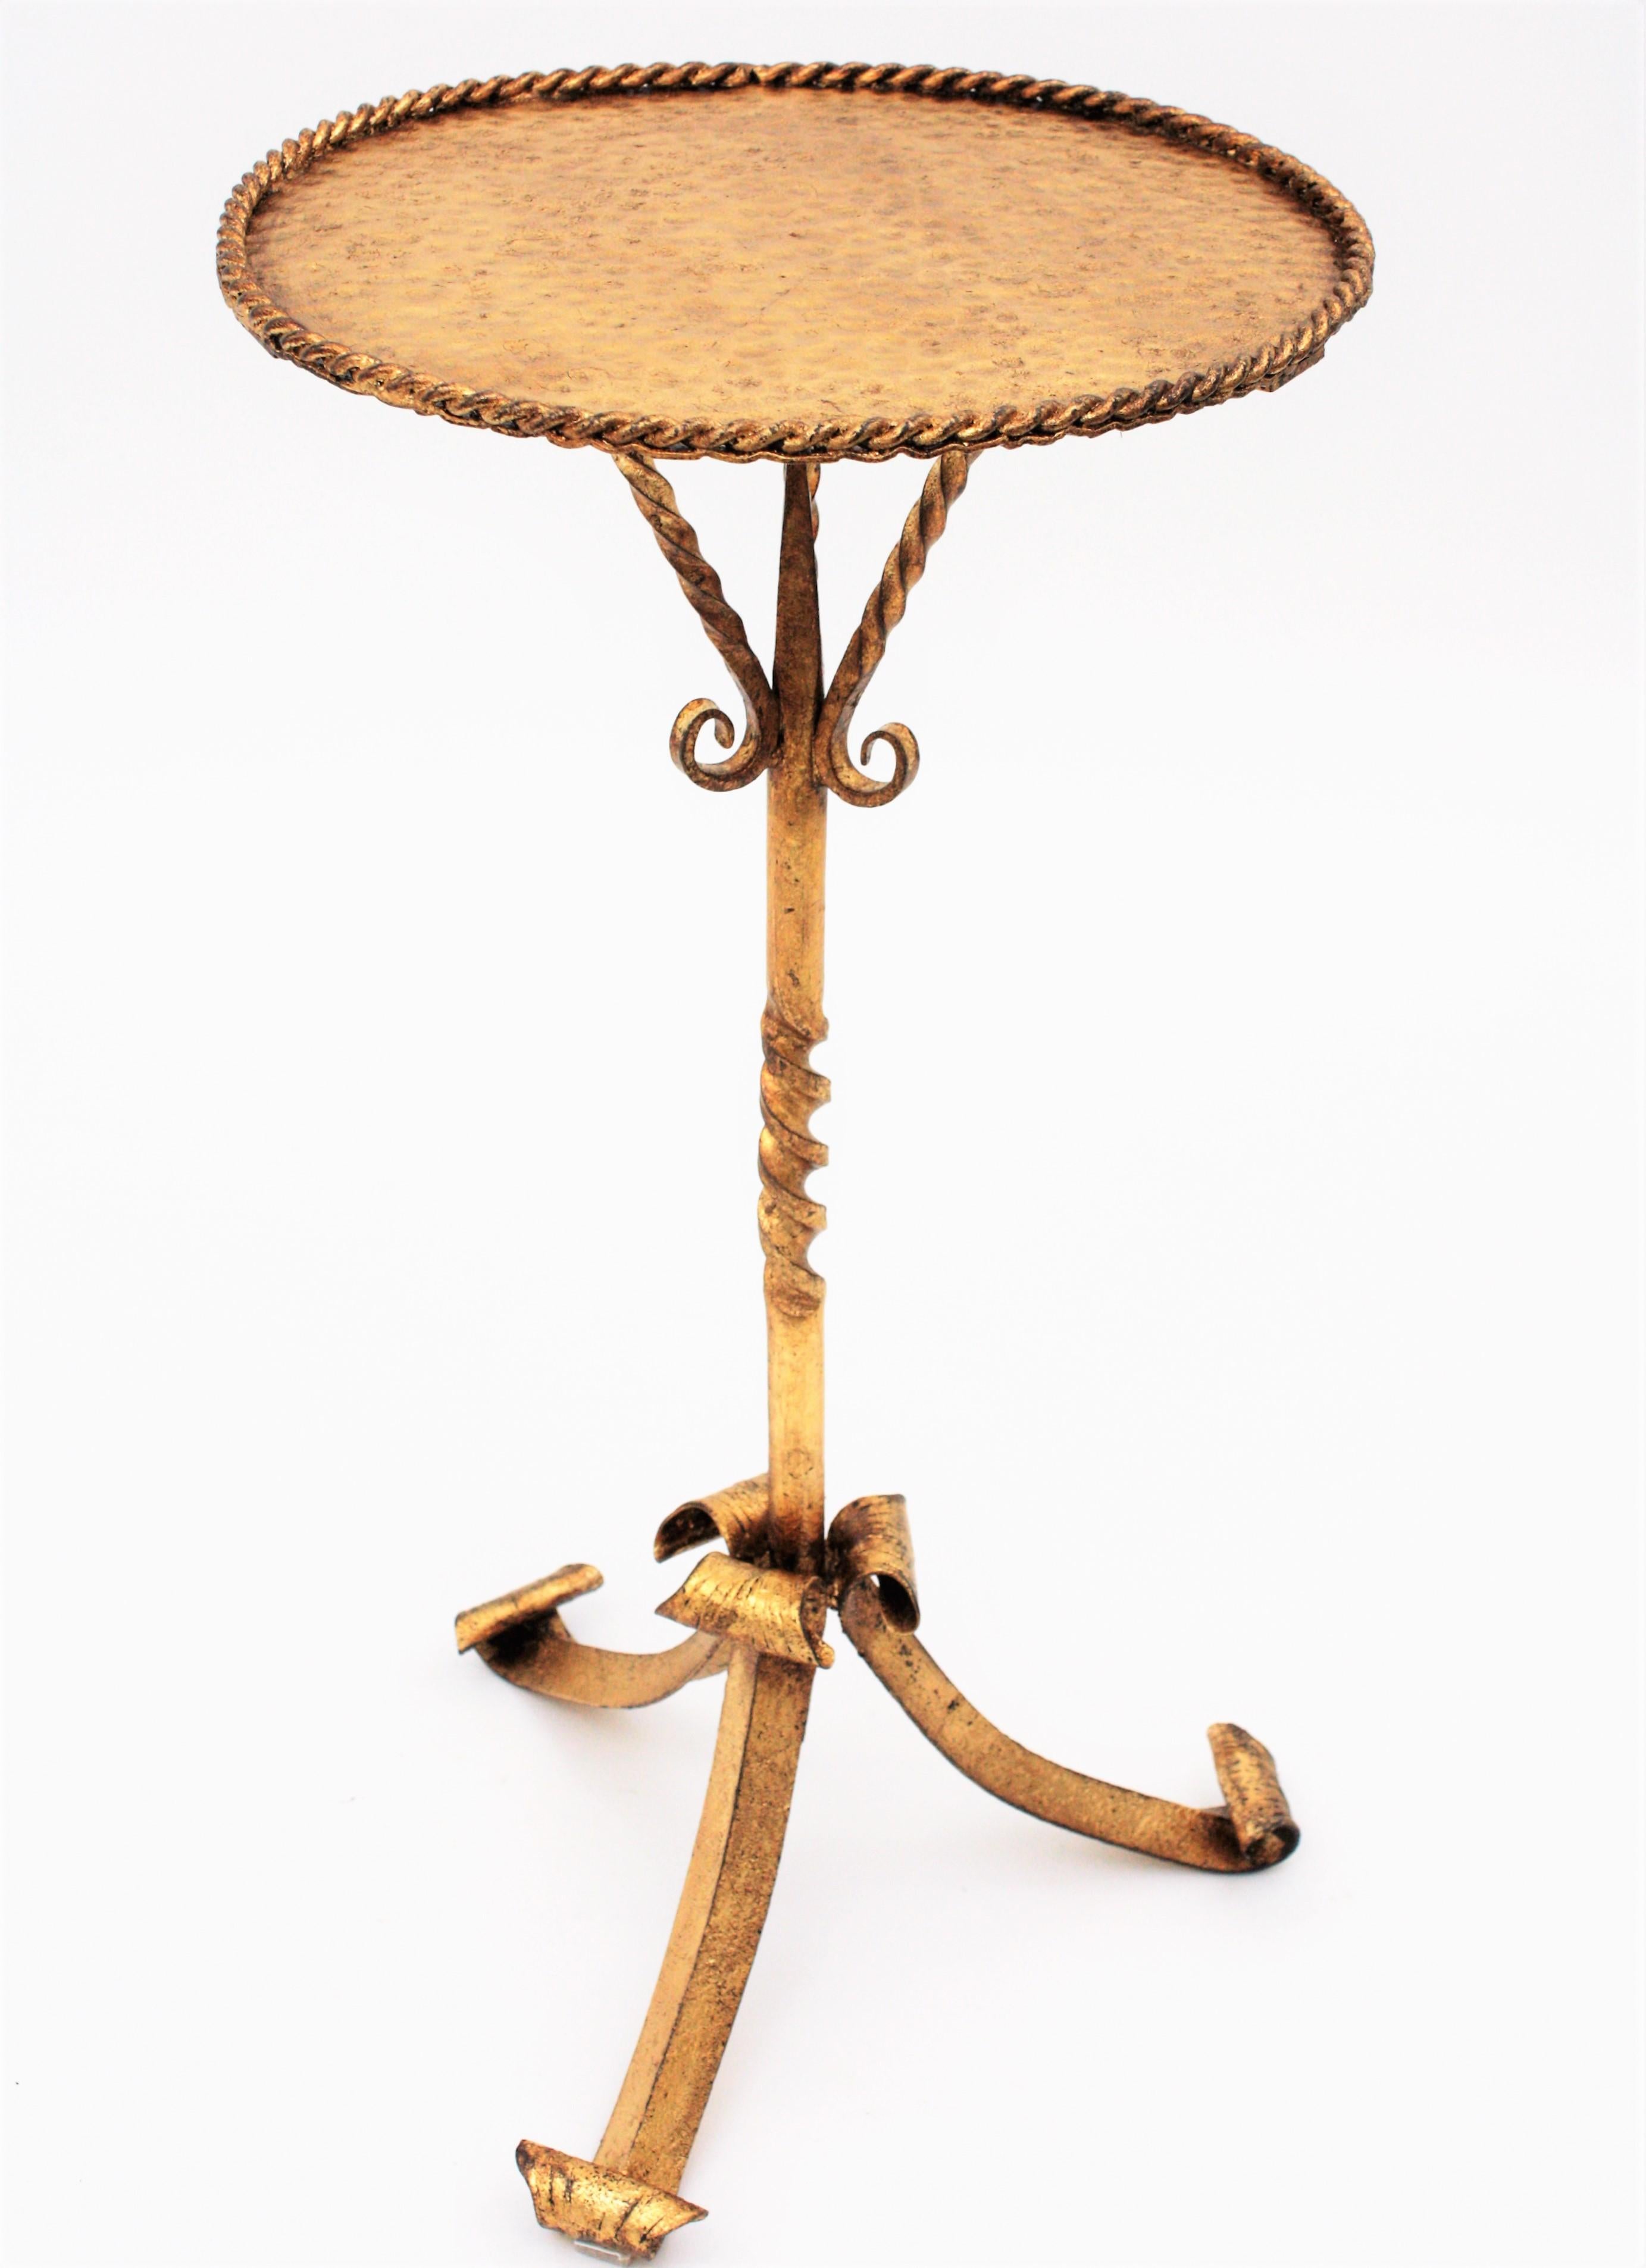 Spanish gilt wrought iron gueridon end drinks table on a tripod base, Spain, 1960s.
An Spanish wrought iron guéridon table, stand or drinks table with gold leaf finish.
Beautiful to use as a candles Stand, side table, drinks table or smokers